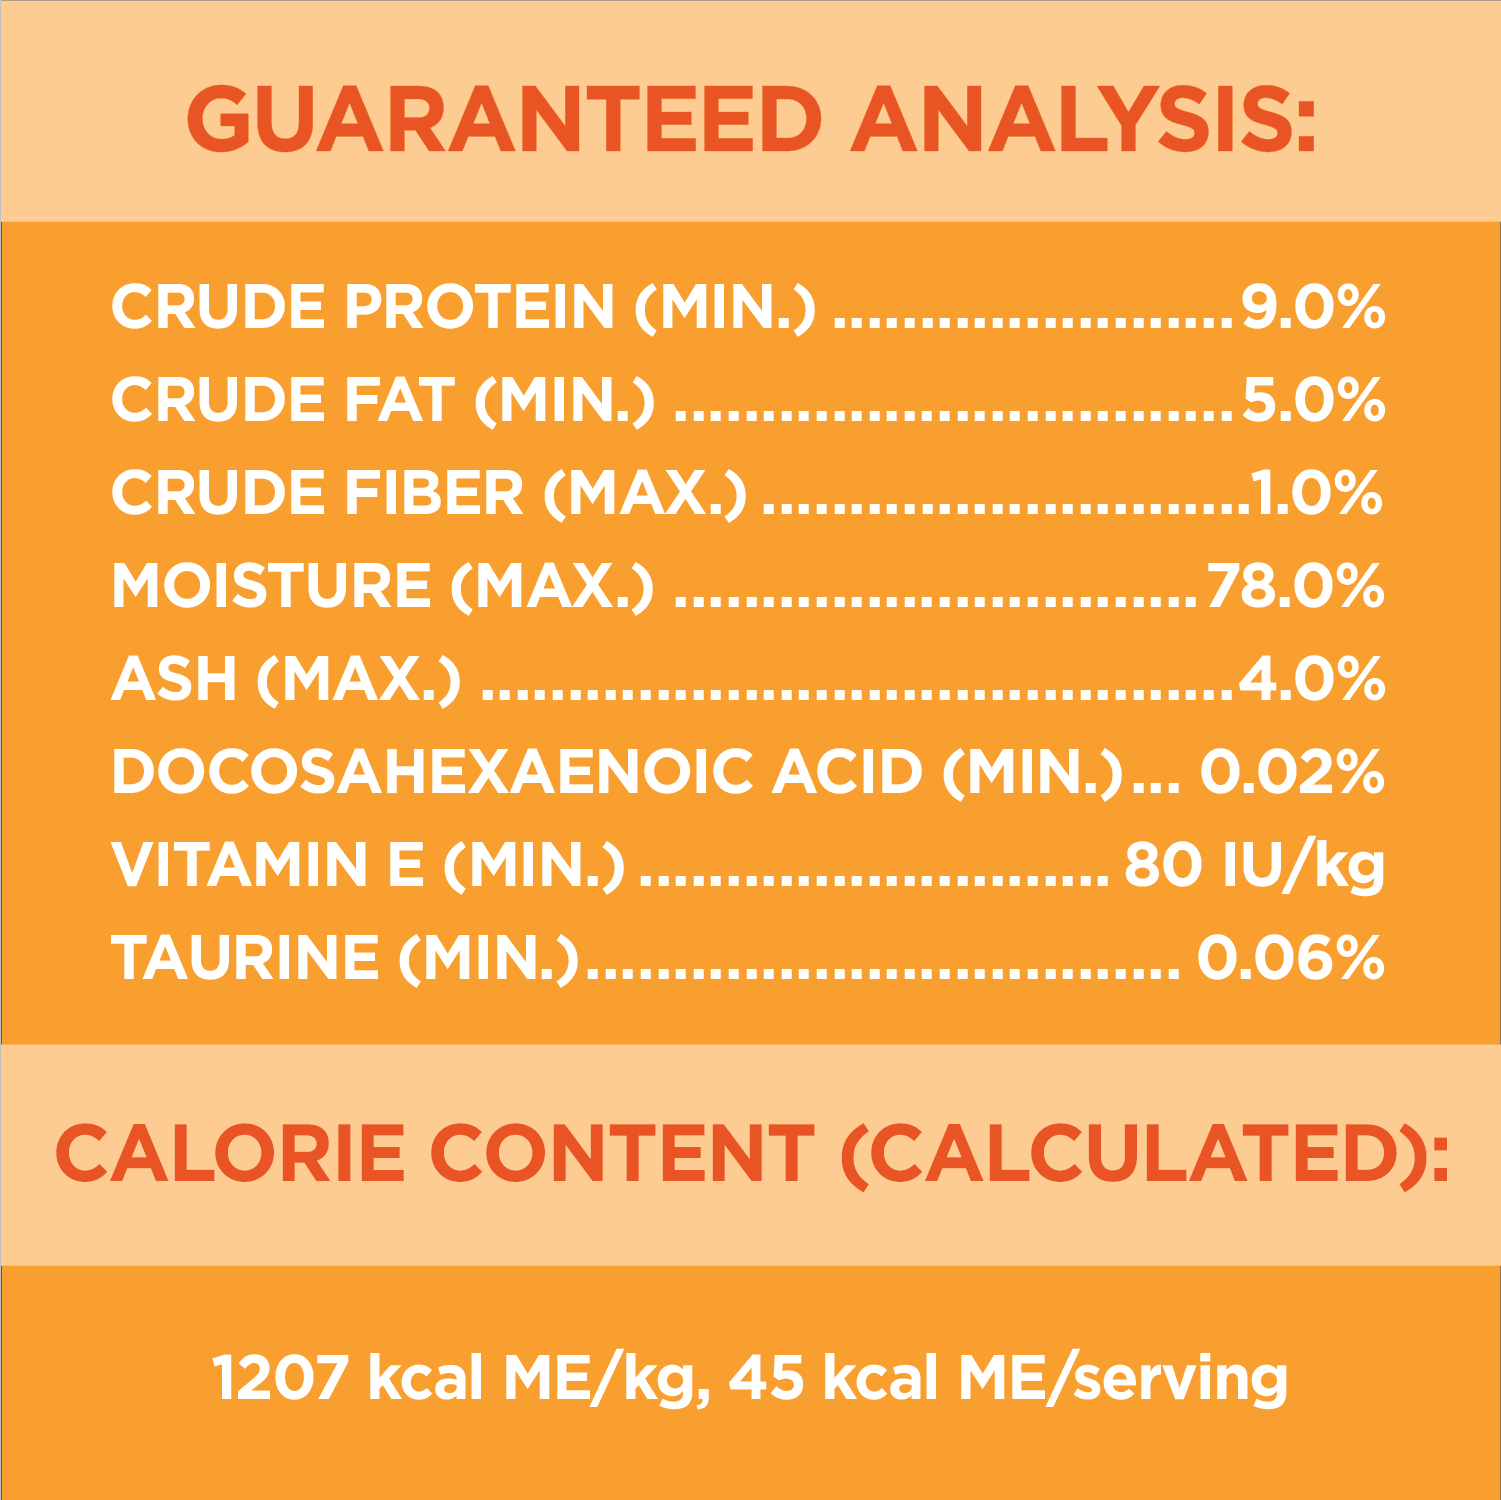 IAMS™ PERFECT PORTIONS™ Healthy Kitten Wet Cat Food Chicken Paté guaranteed analysis image